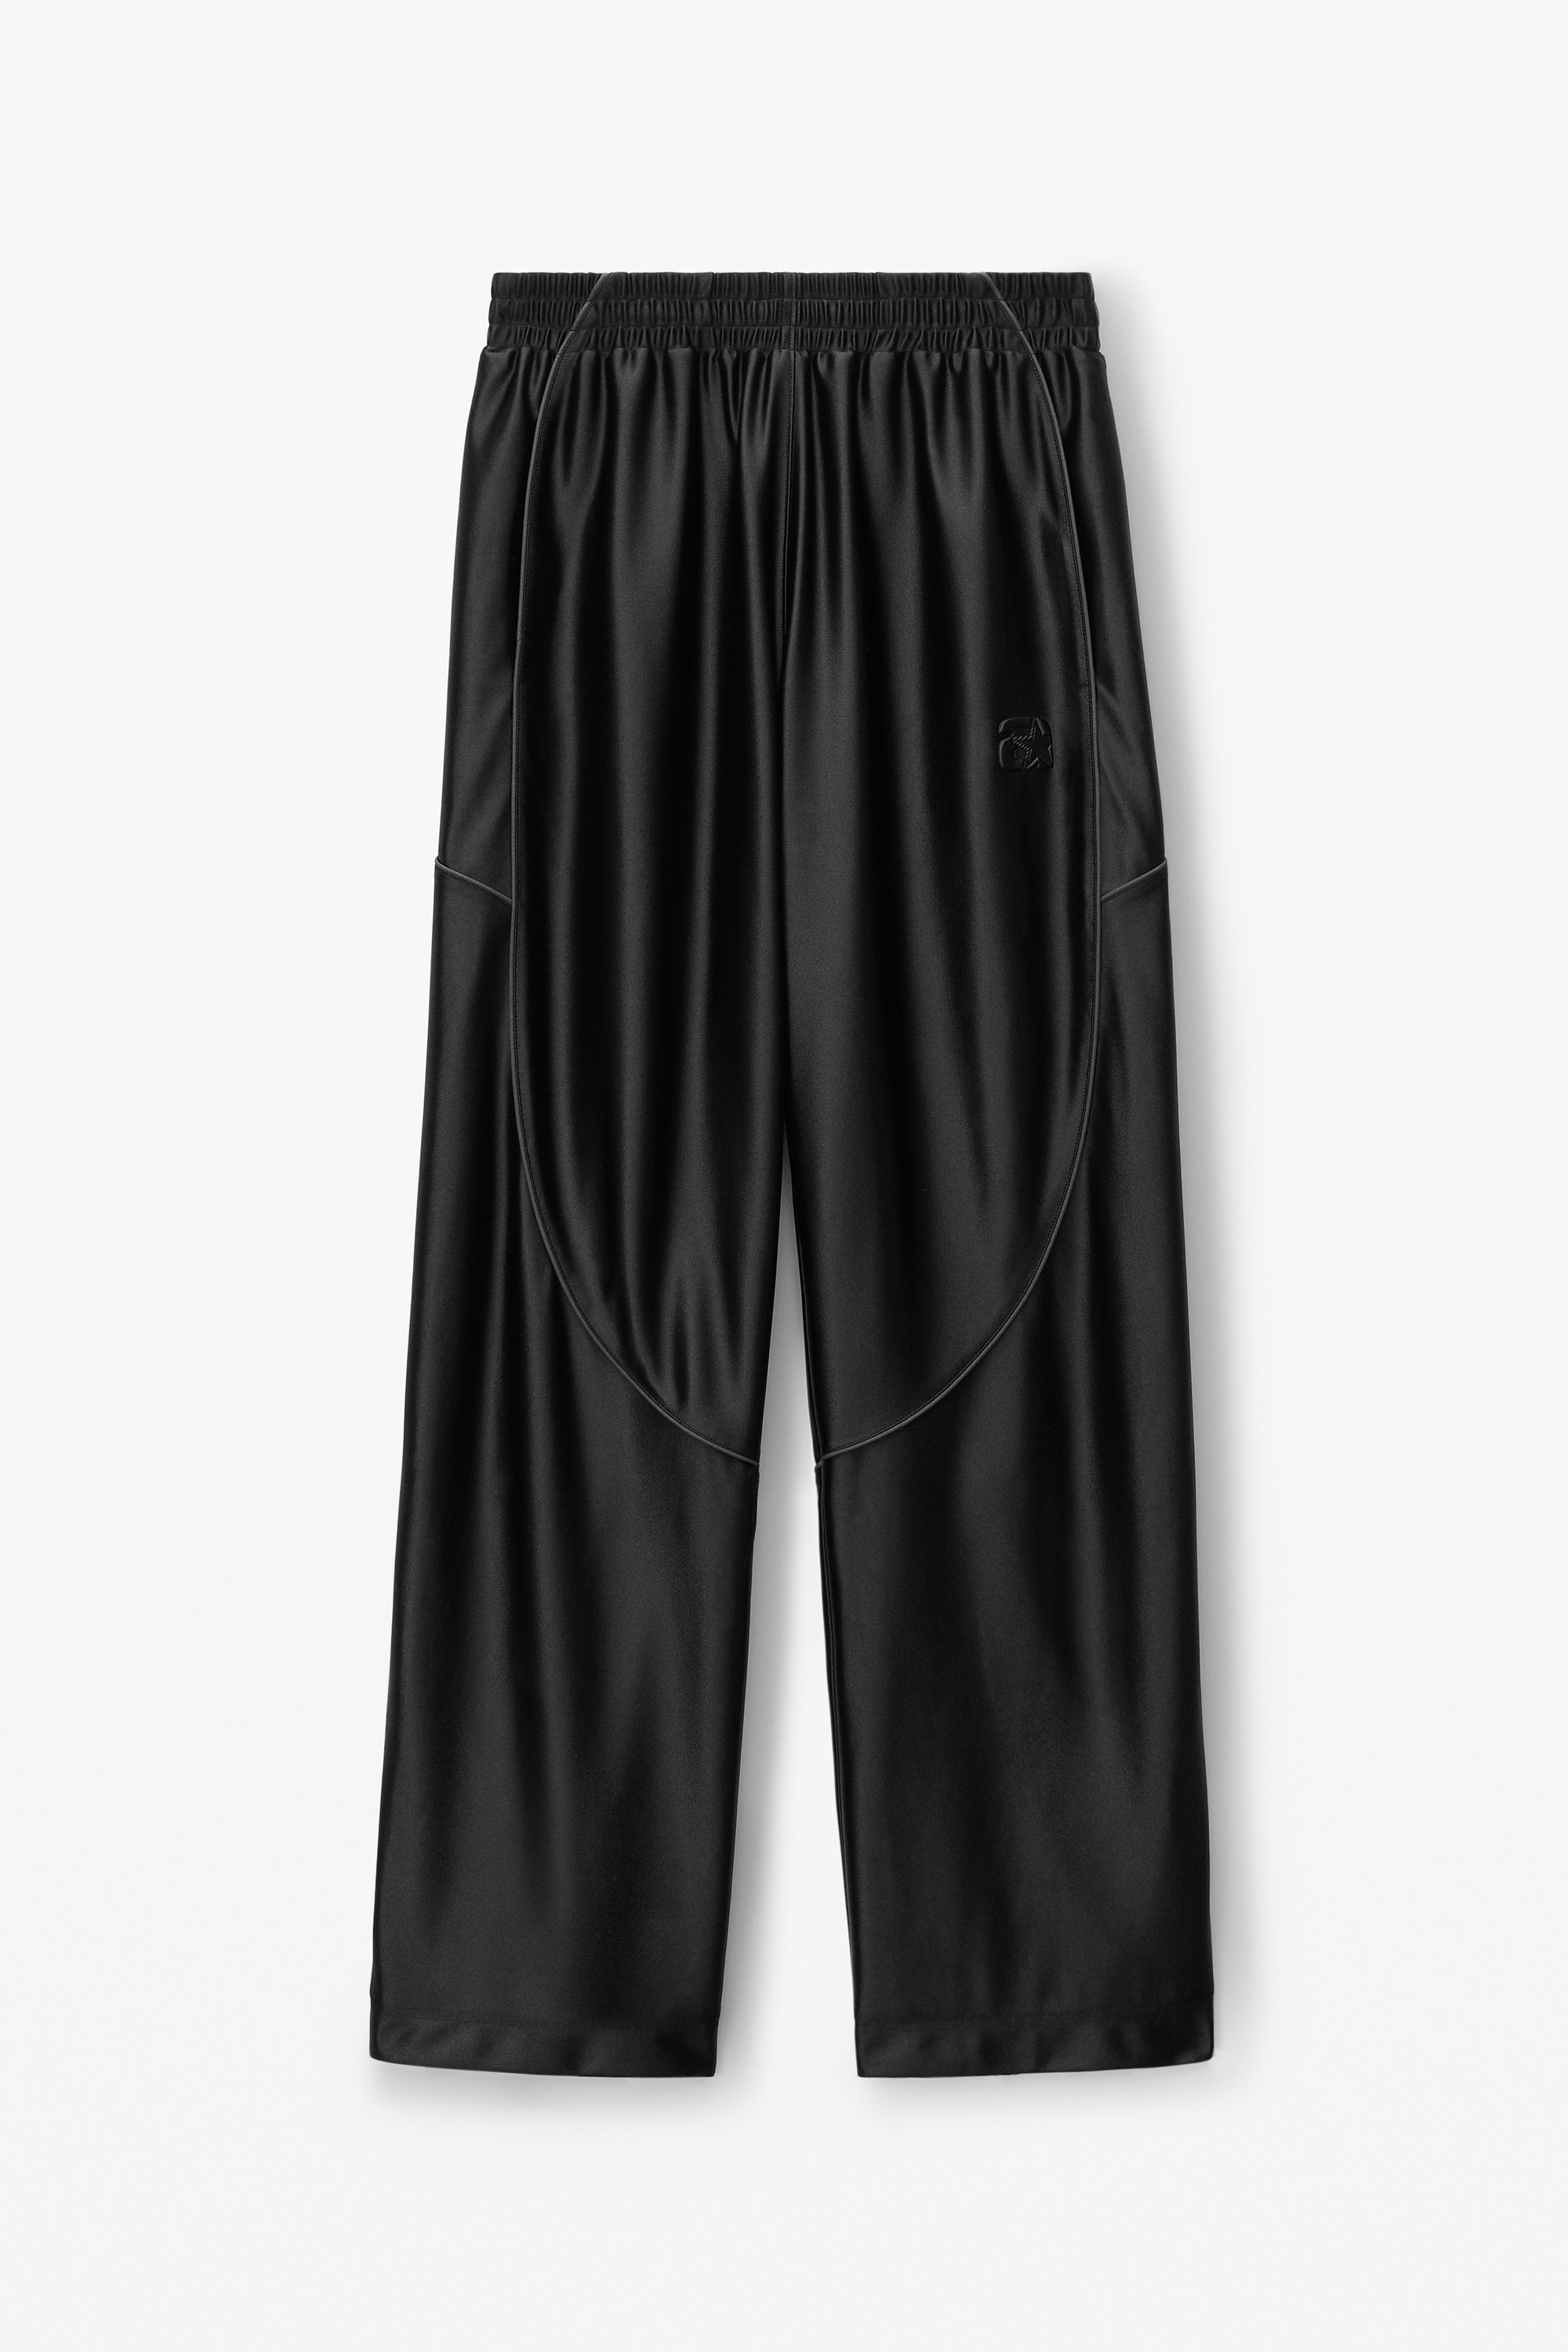 TRACK PANTS IN SATIN FAILLE JERSEY - 1